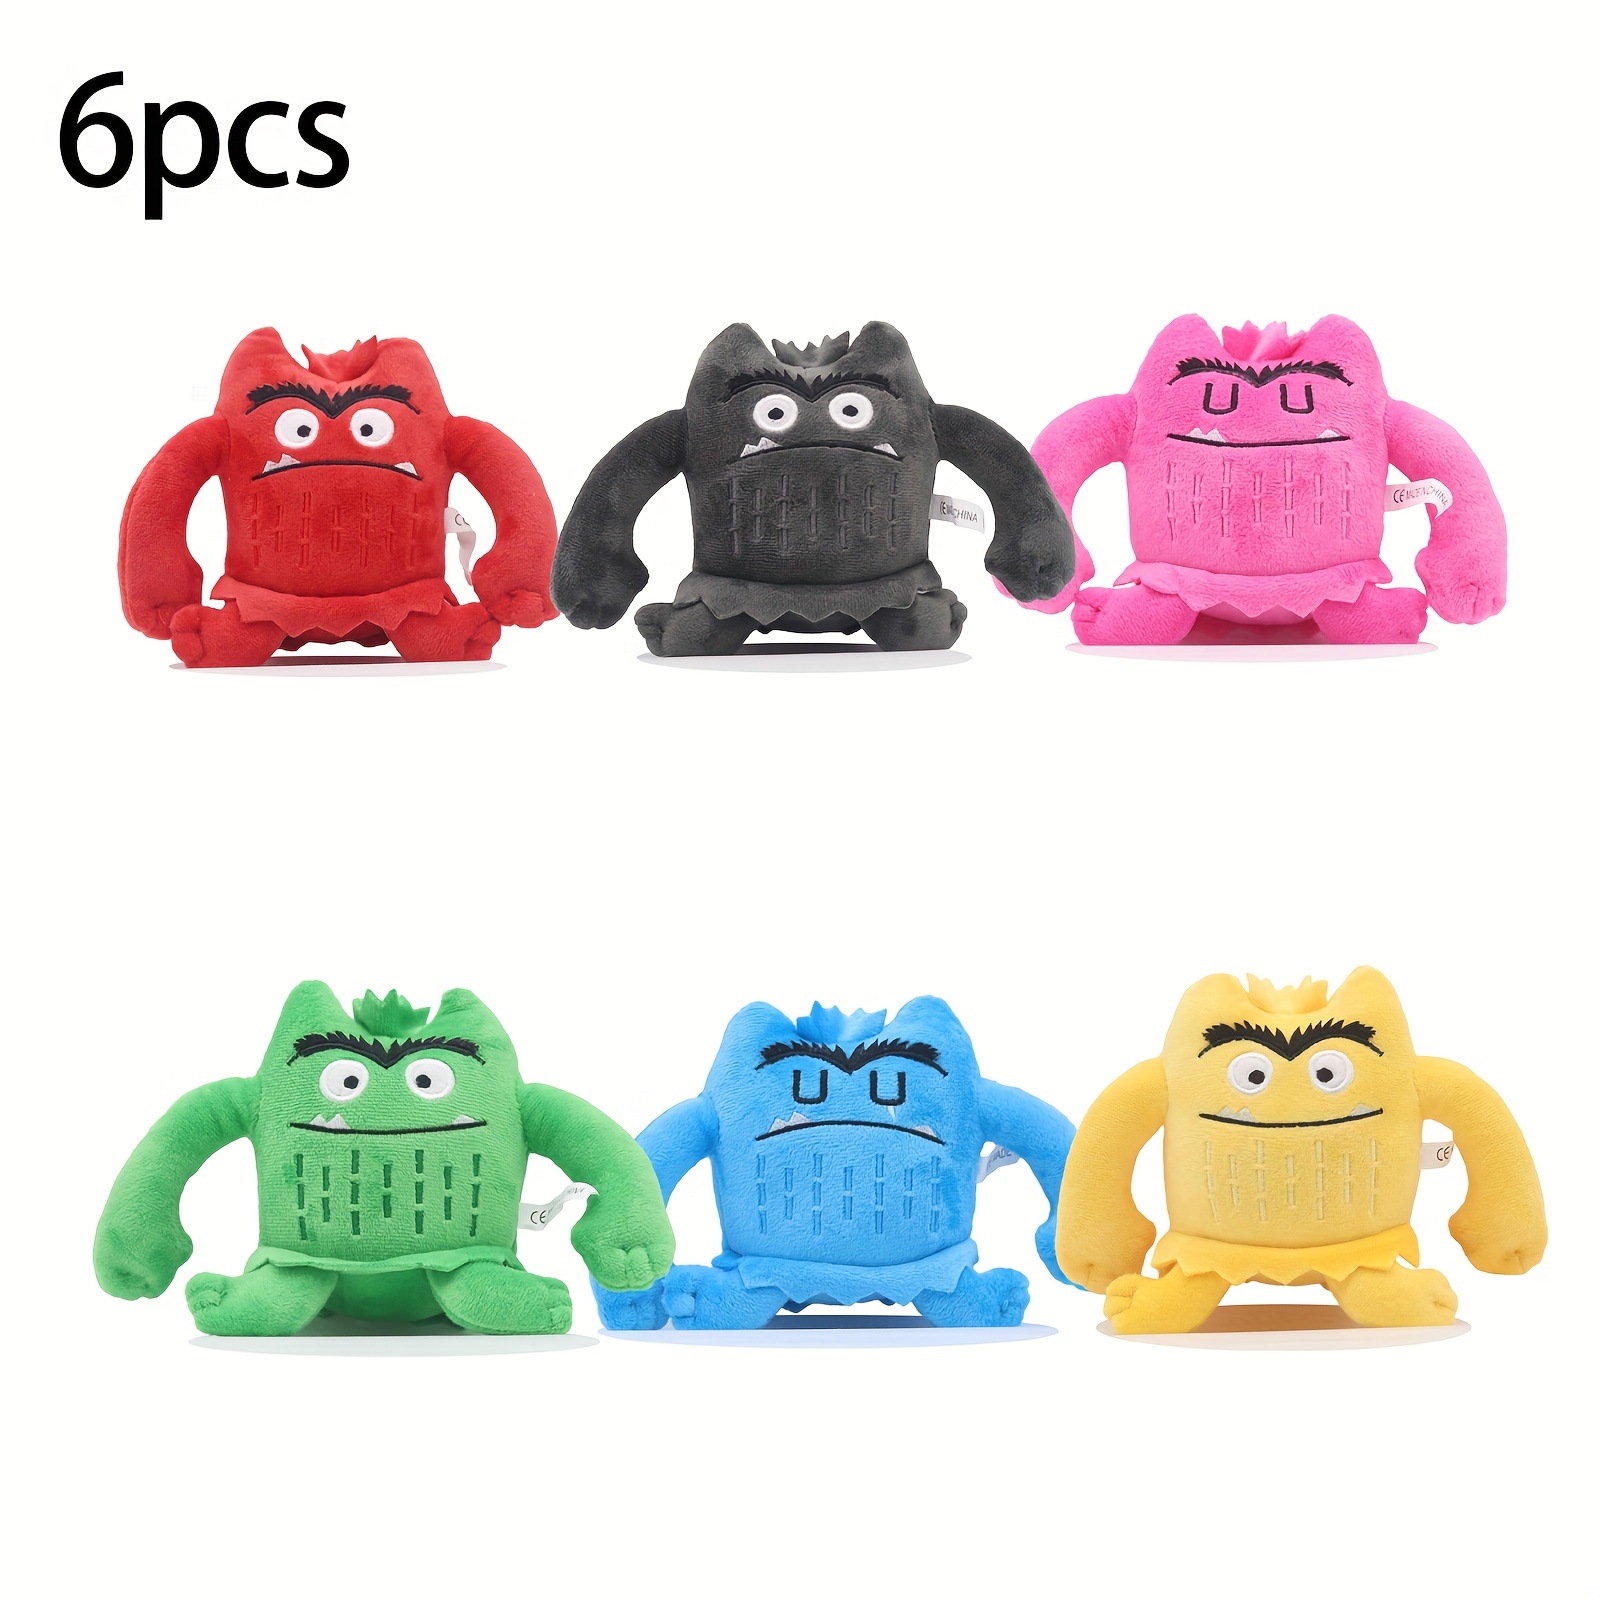 

6pcs Cute Color Monster Plush Toys, My Emotional Little Monster Cartoon Doll, Colorful Cute Emotion Monster Plush Toy, Great Emotion Practice Gift For Kids